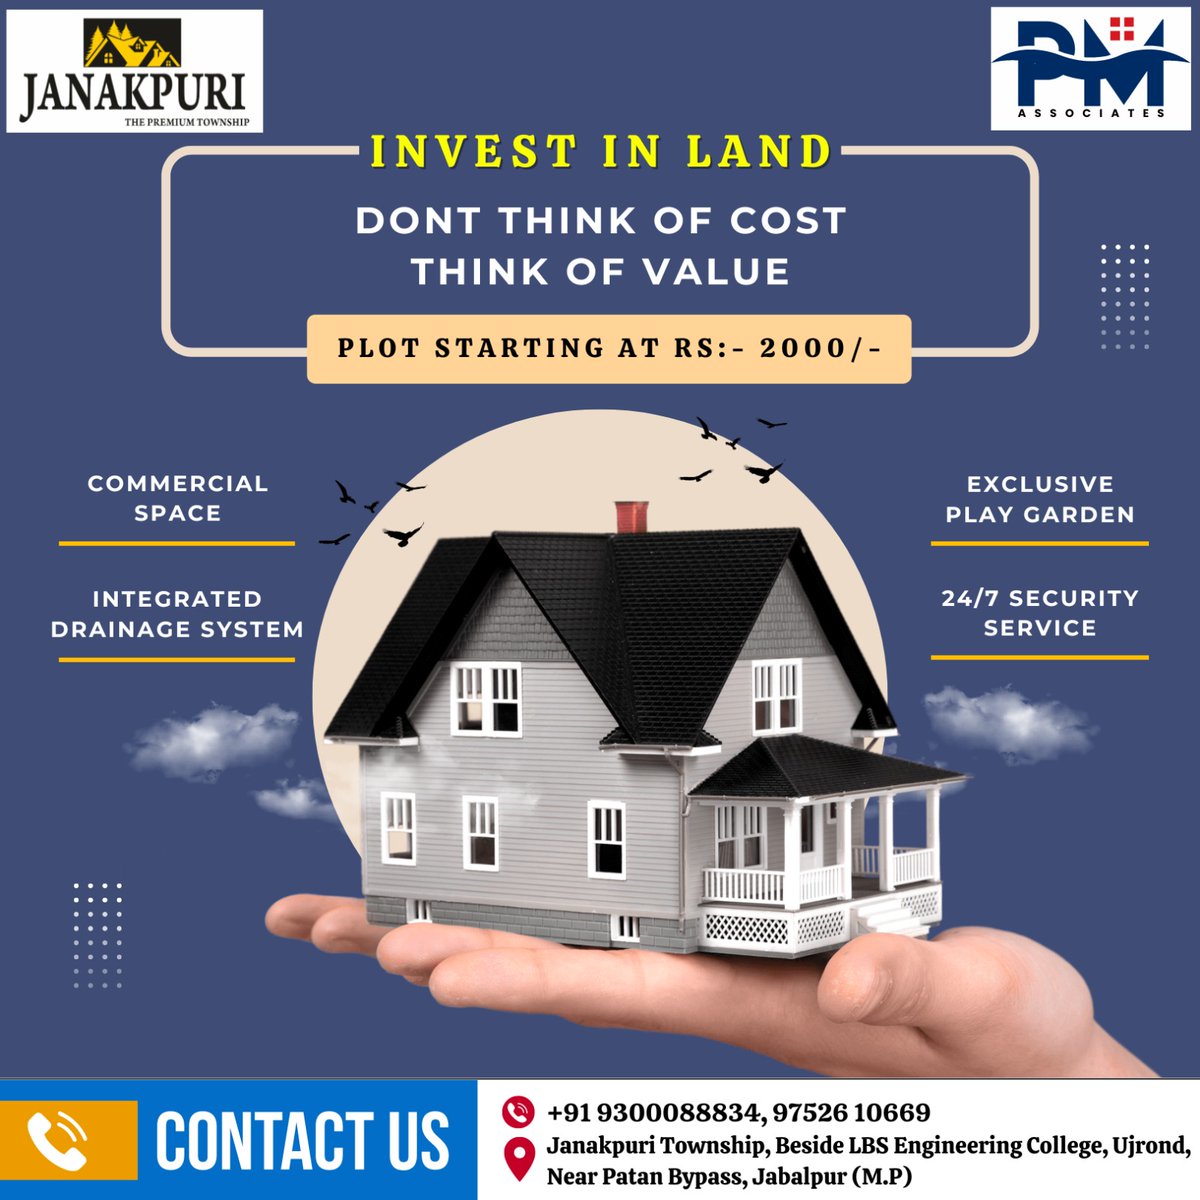 Build your future in Janakpuri! Explore available plots and turn your vision into reality. #JanakpuriTownship #OwnYourLand
.
.
#JanakpuriPlots #LandForSale #InvestInRealEstate #PrimeLocation #GrowingTownship #FutureInvestment #GreatOpportunity #BuildYourFuture